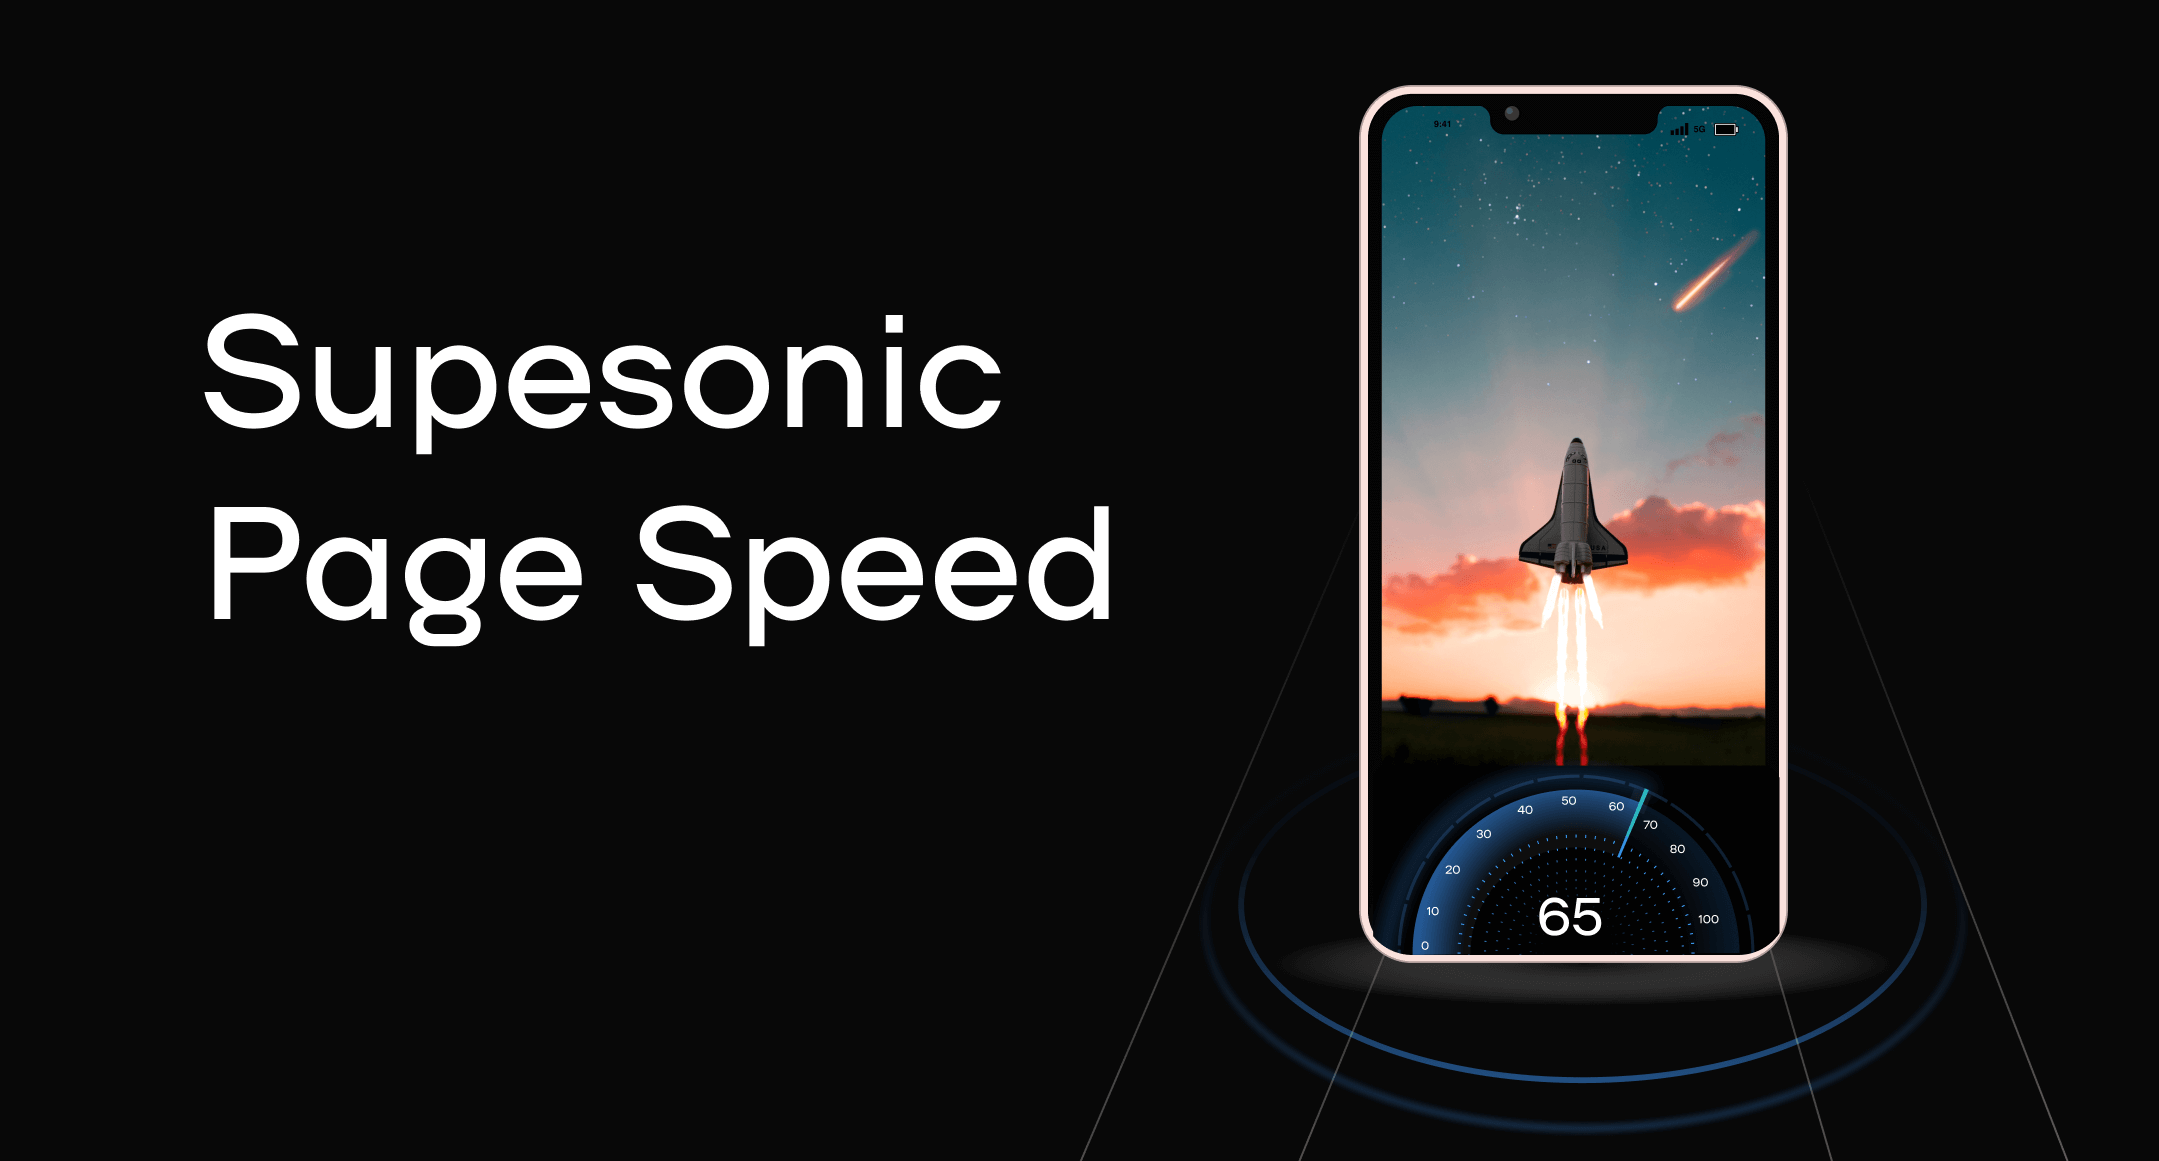 How to Design a Website with Supersonic Page Speed